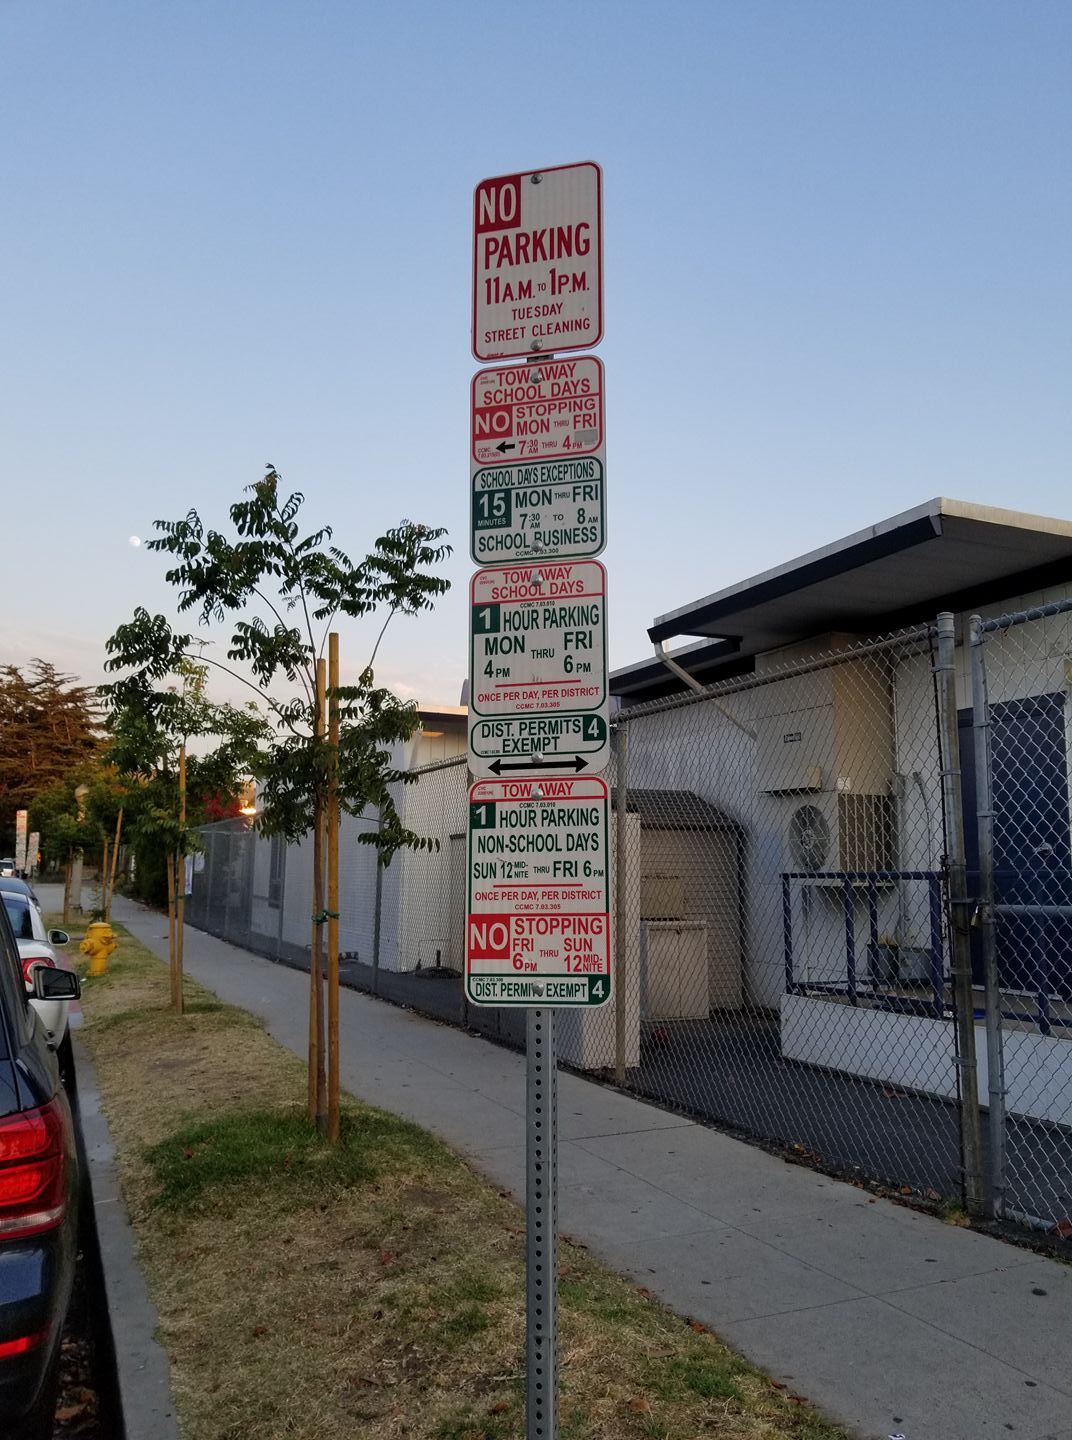 So, can I park here?